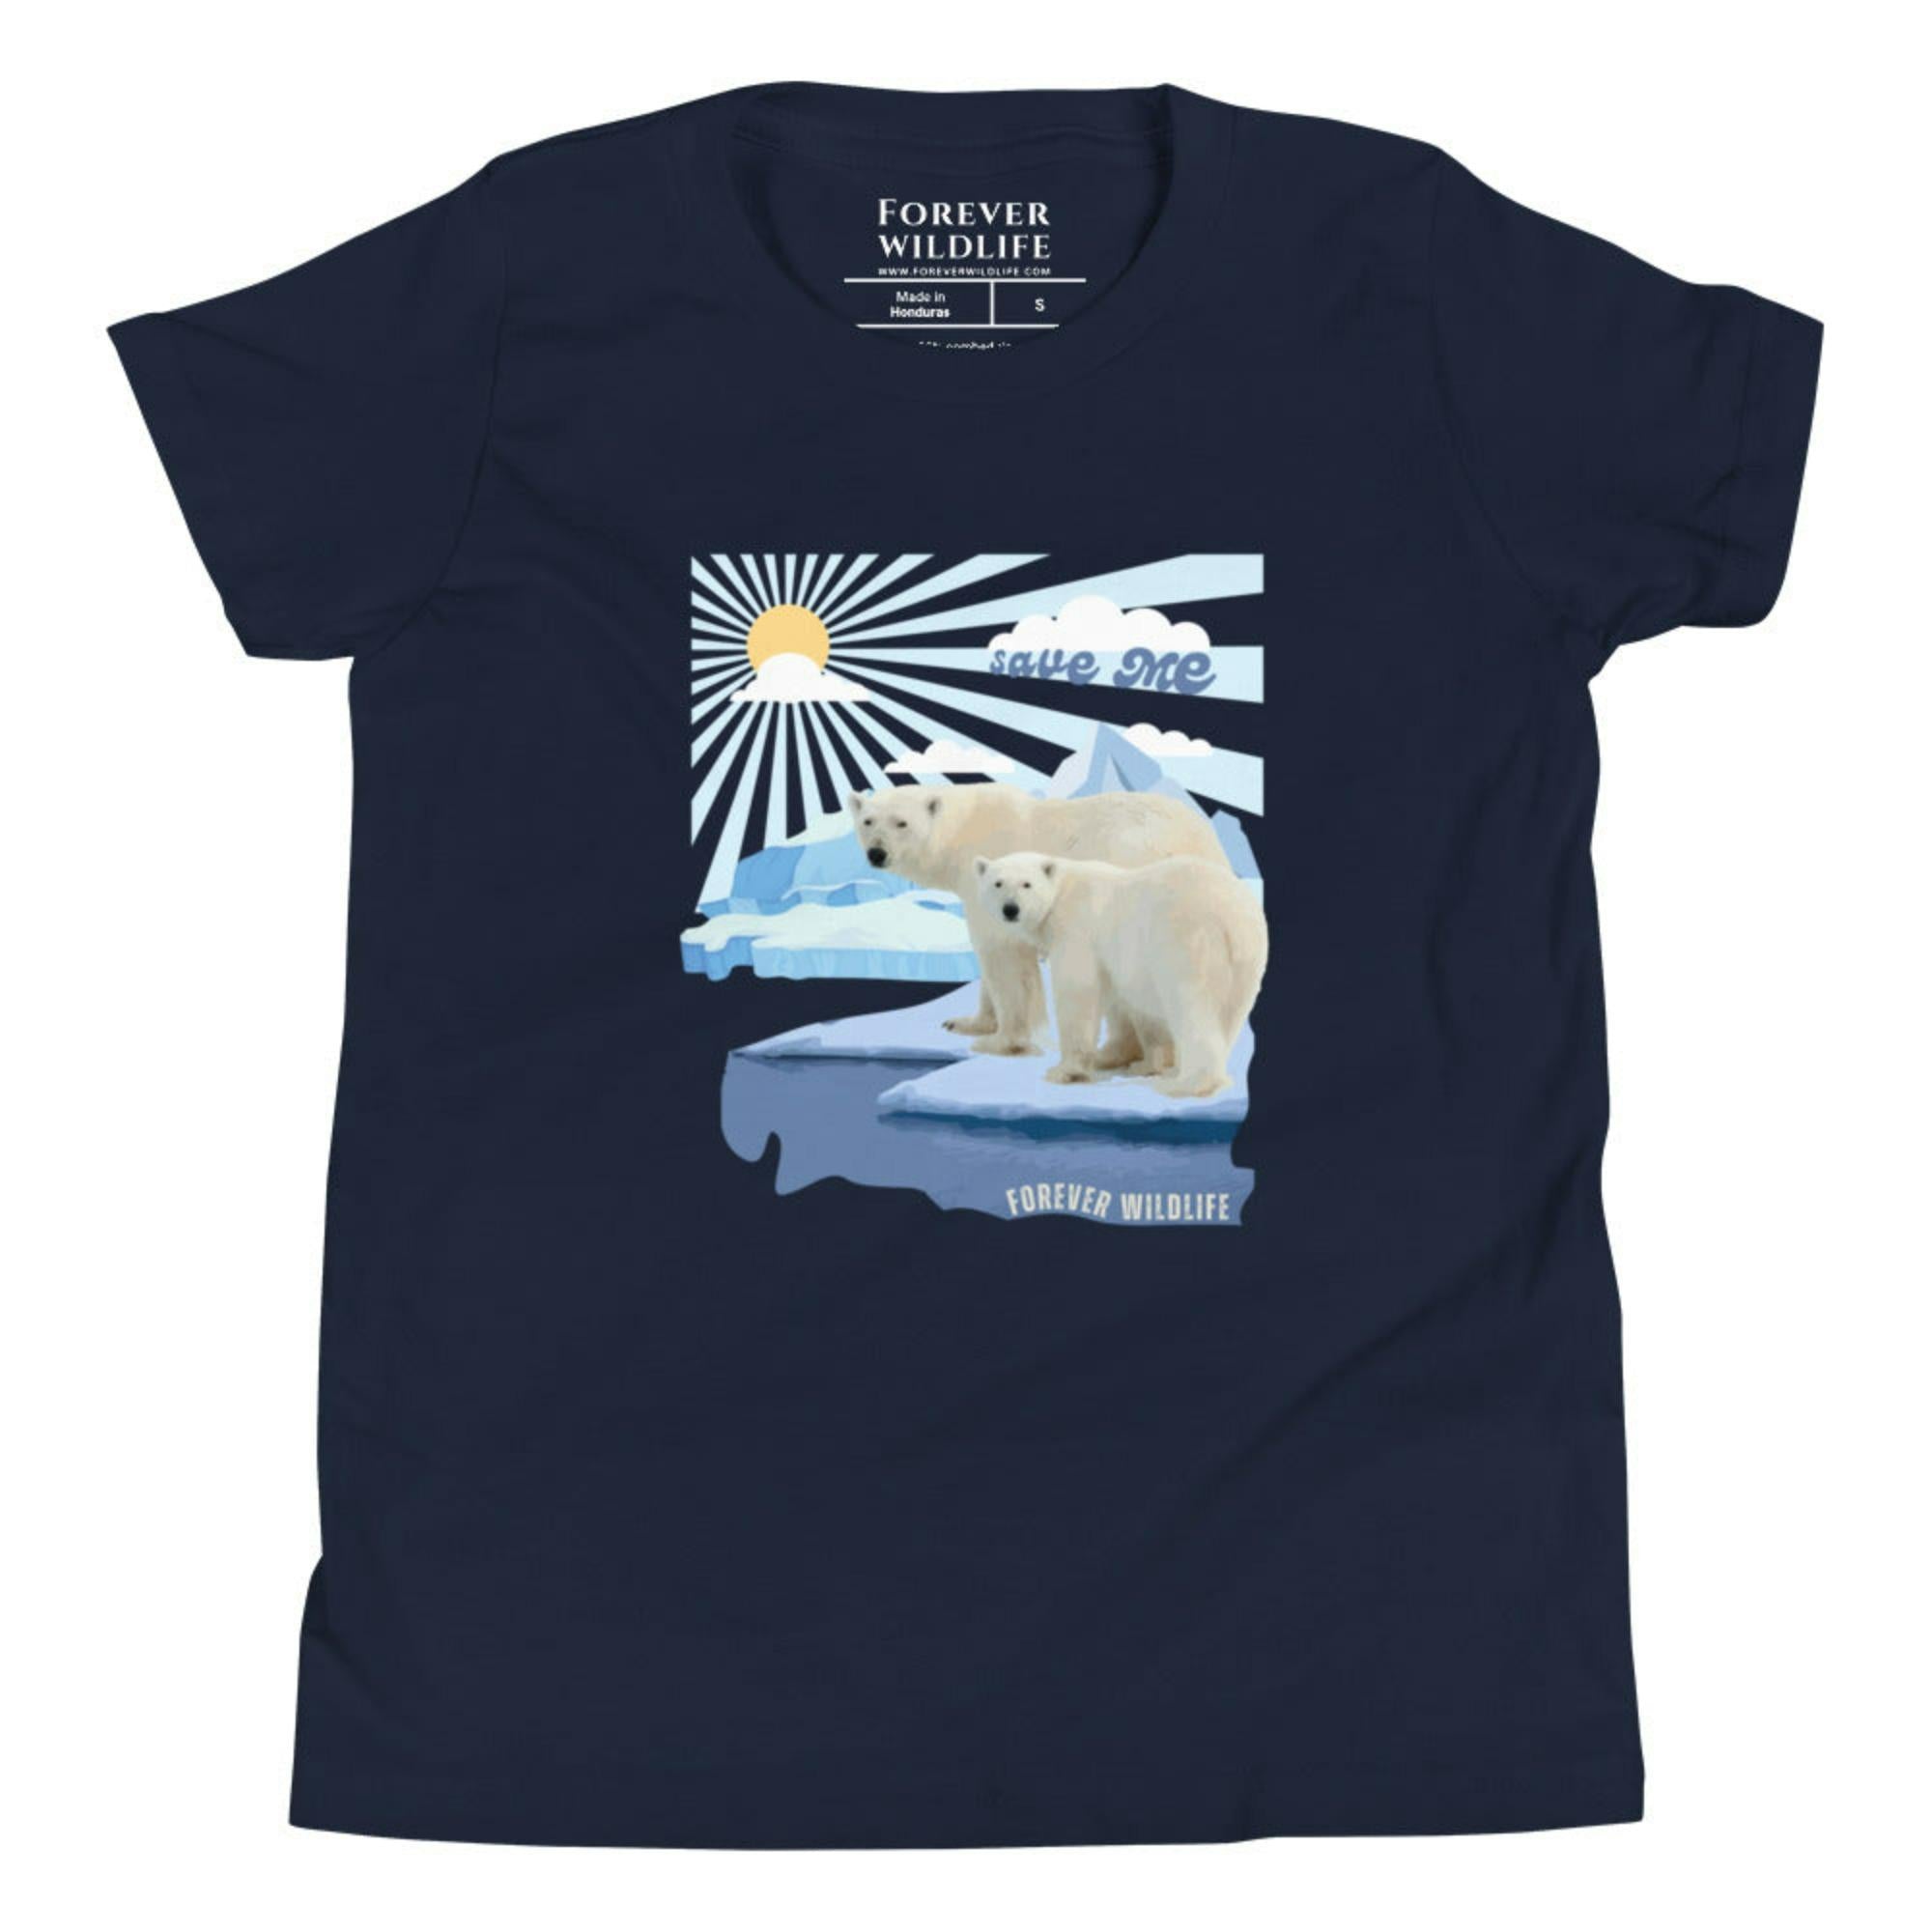 Navy Youth T-Shirt with Polar Bears graphic as part of Wildlife T Shirts, Wildlife Clothing & Apparel by Forever Wildlife